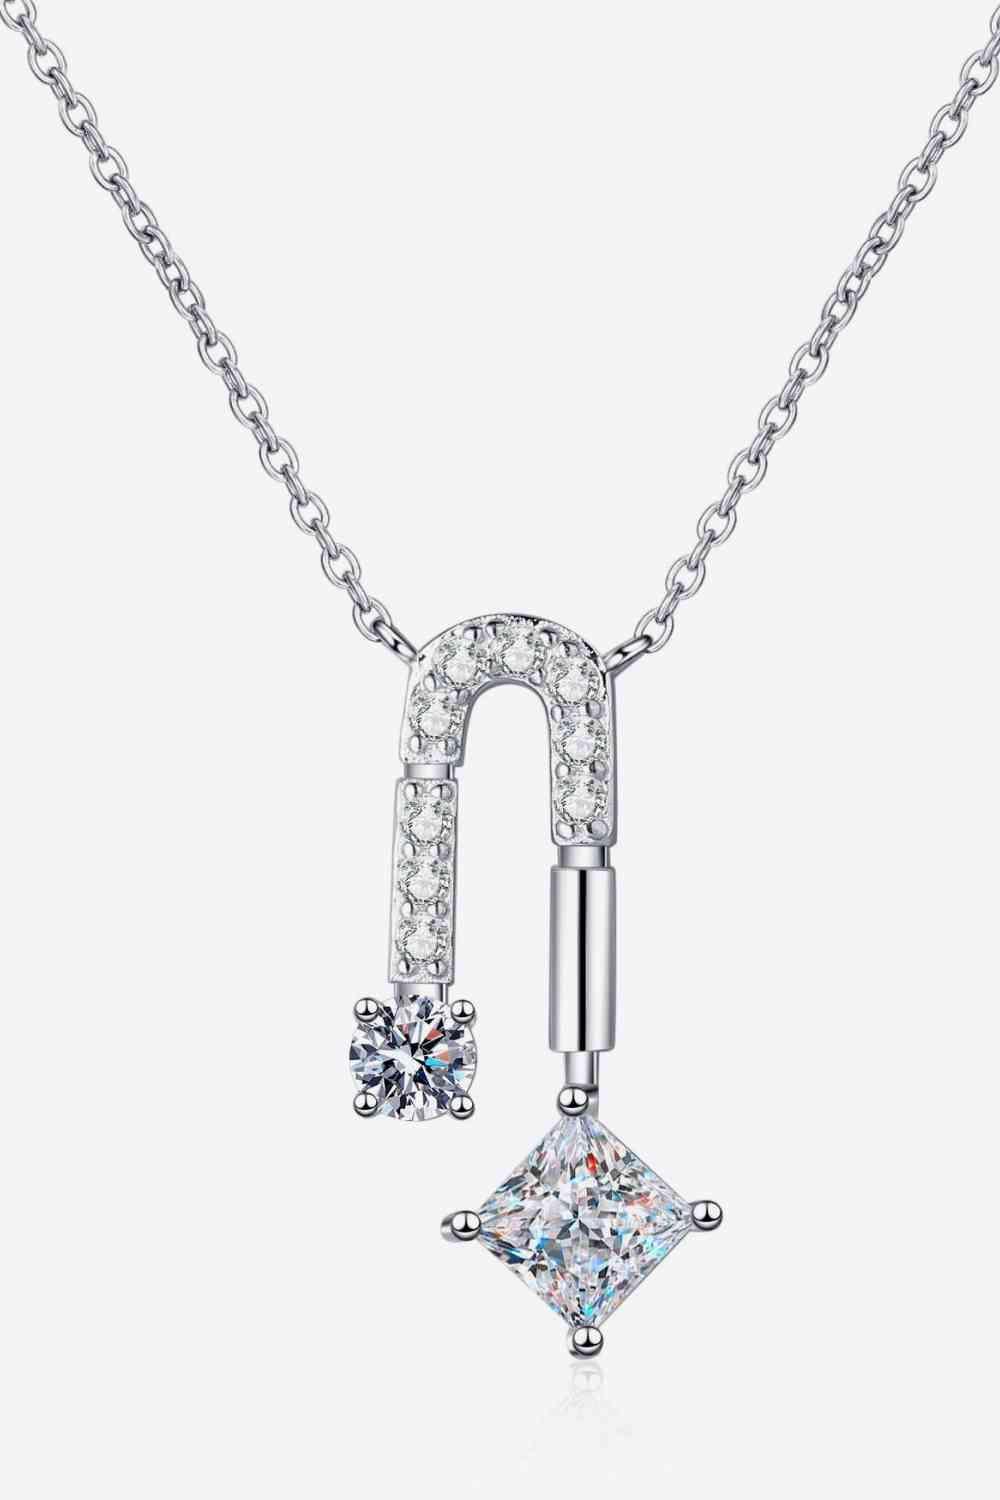 a necklace with a pendant and a diamond